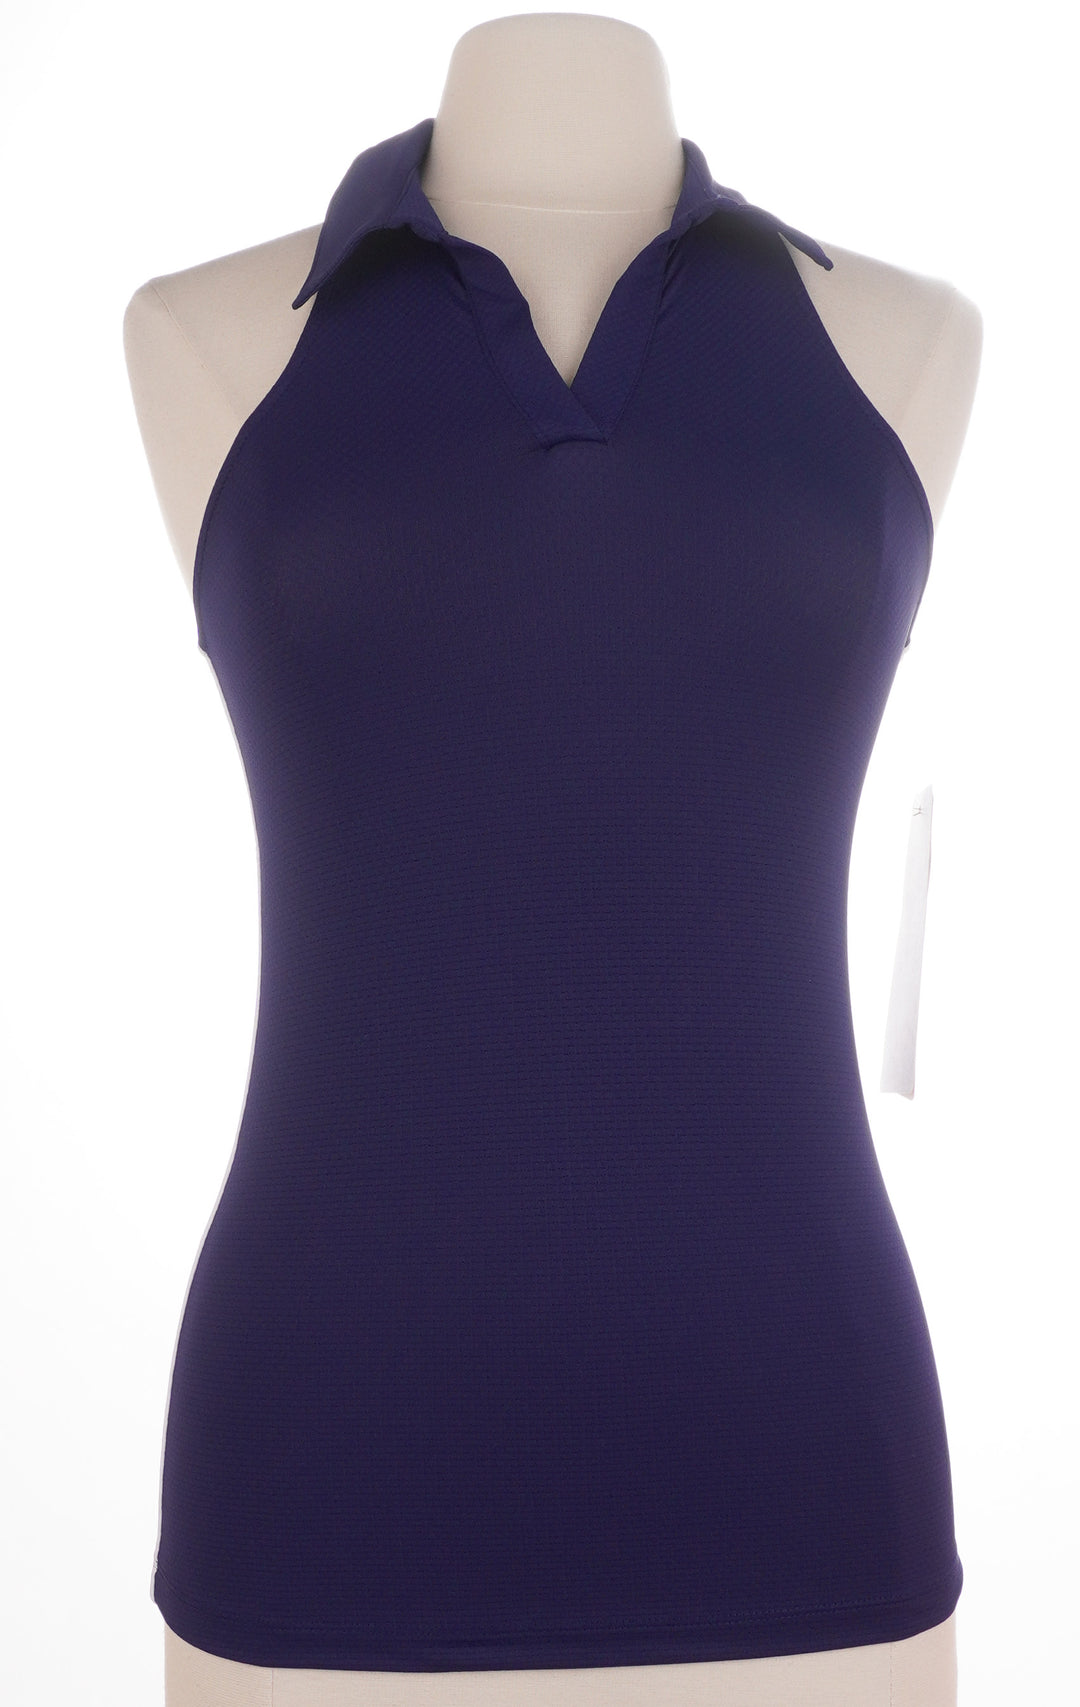 POLO Martinique Tank Shelf Bra Swimsuit in Marine Blue - For Her